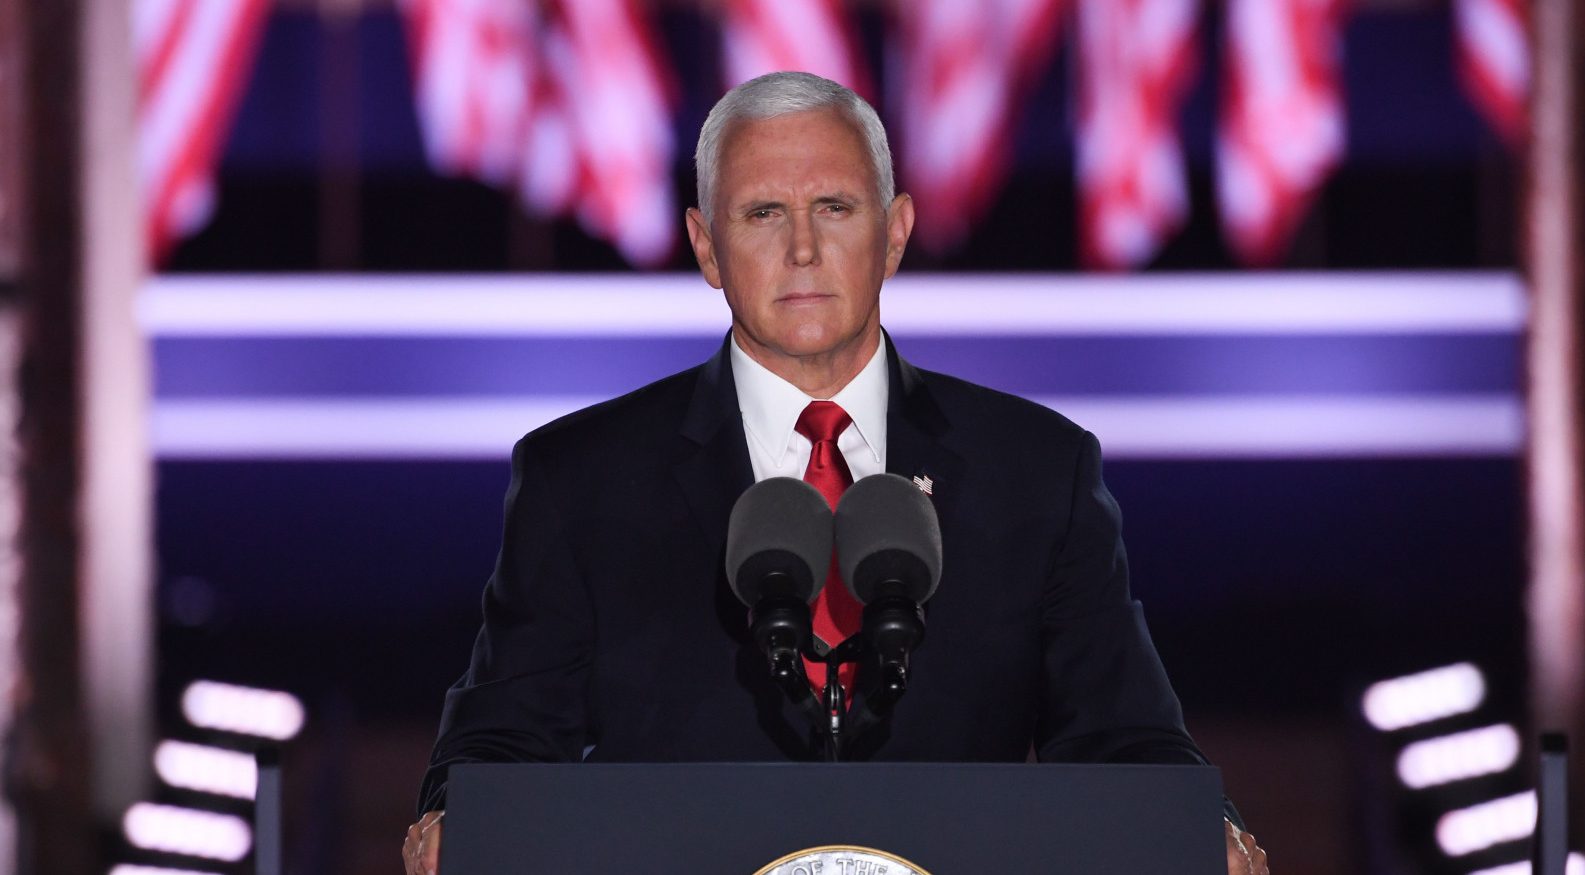 Pence Accepts GOP Vice Presidential Nomination